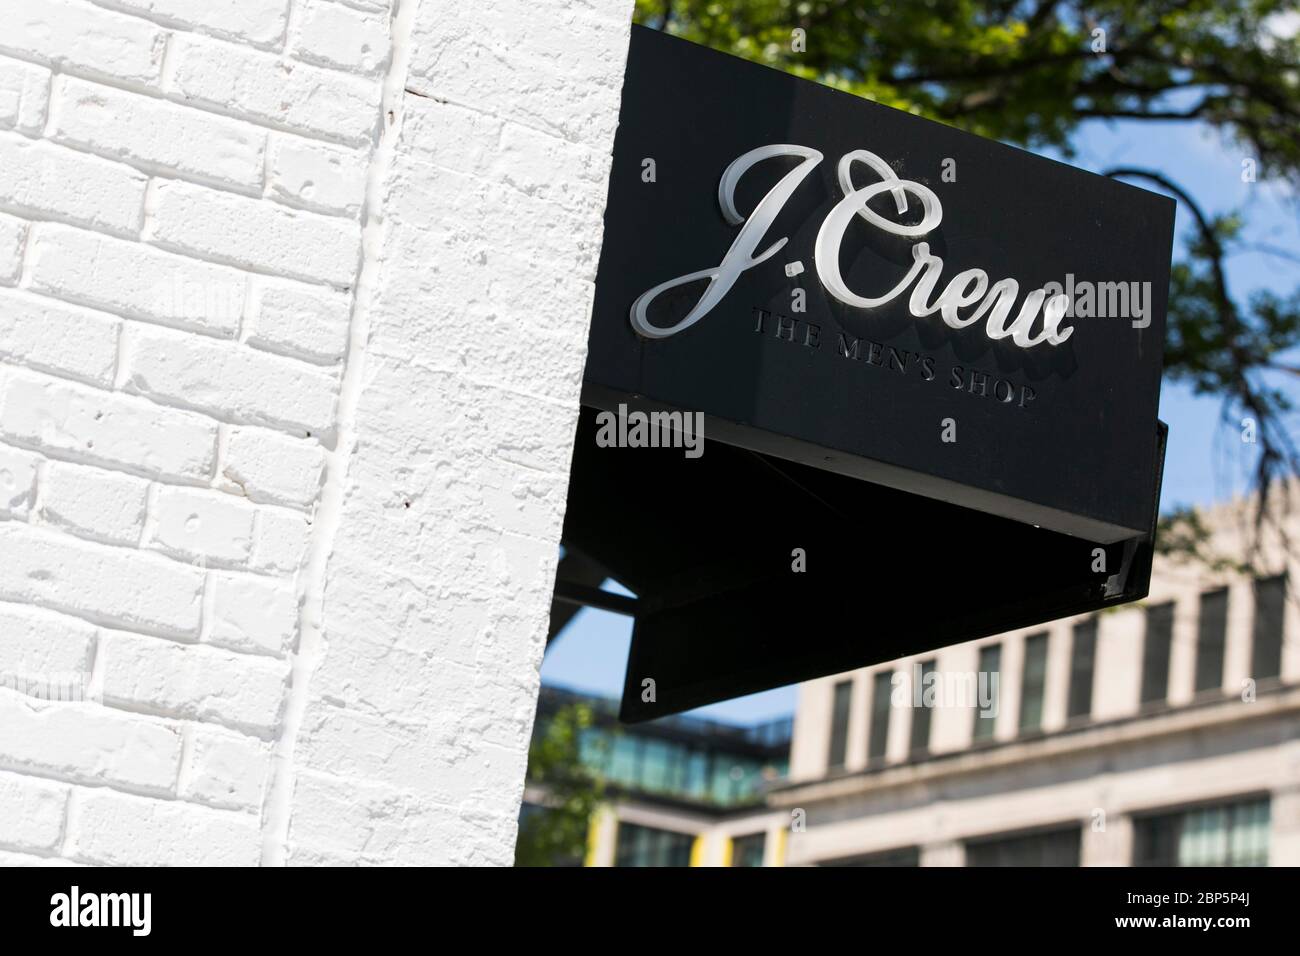 A logo sign outside of a J.Crew The Men's Shop retail store location in Washington, D.C., on May 12, 2020. Stock Photo